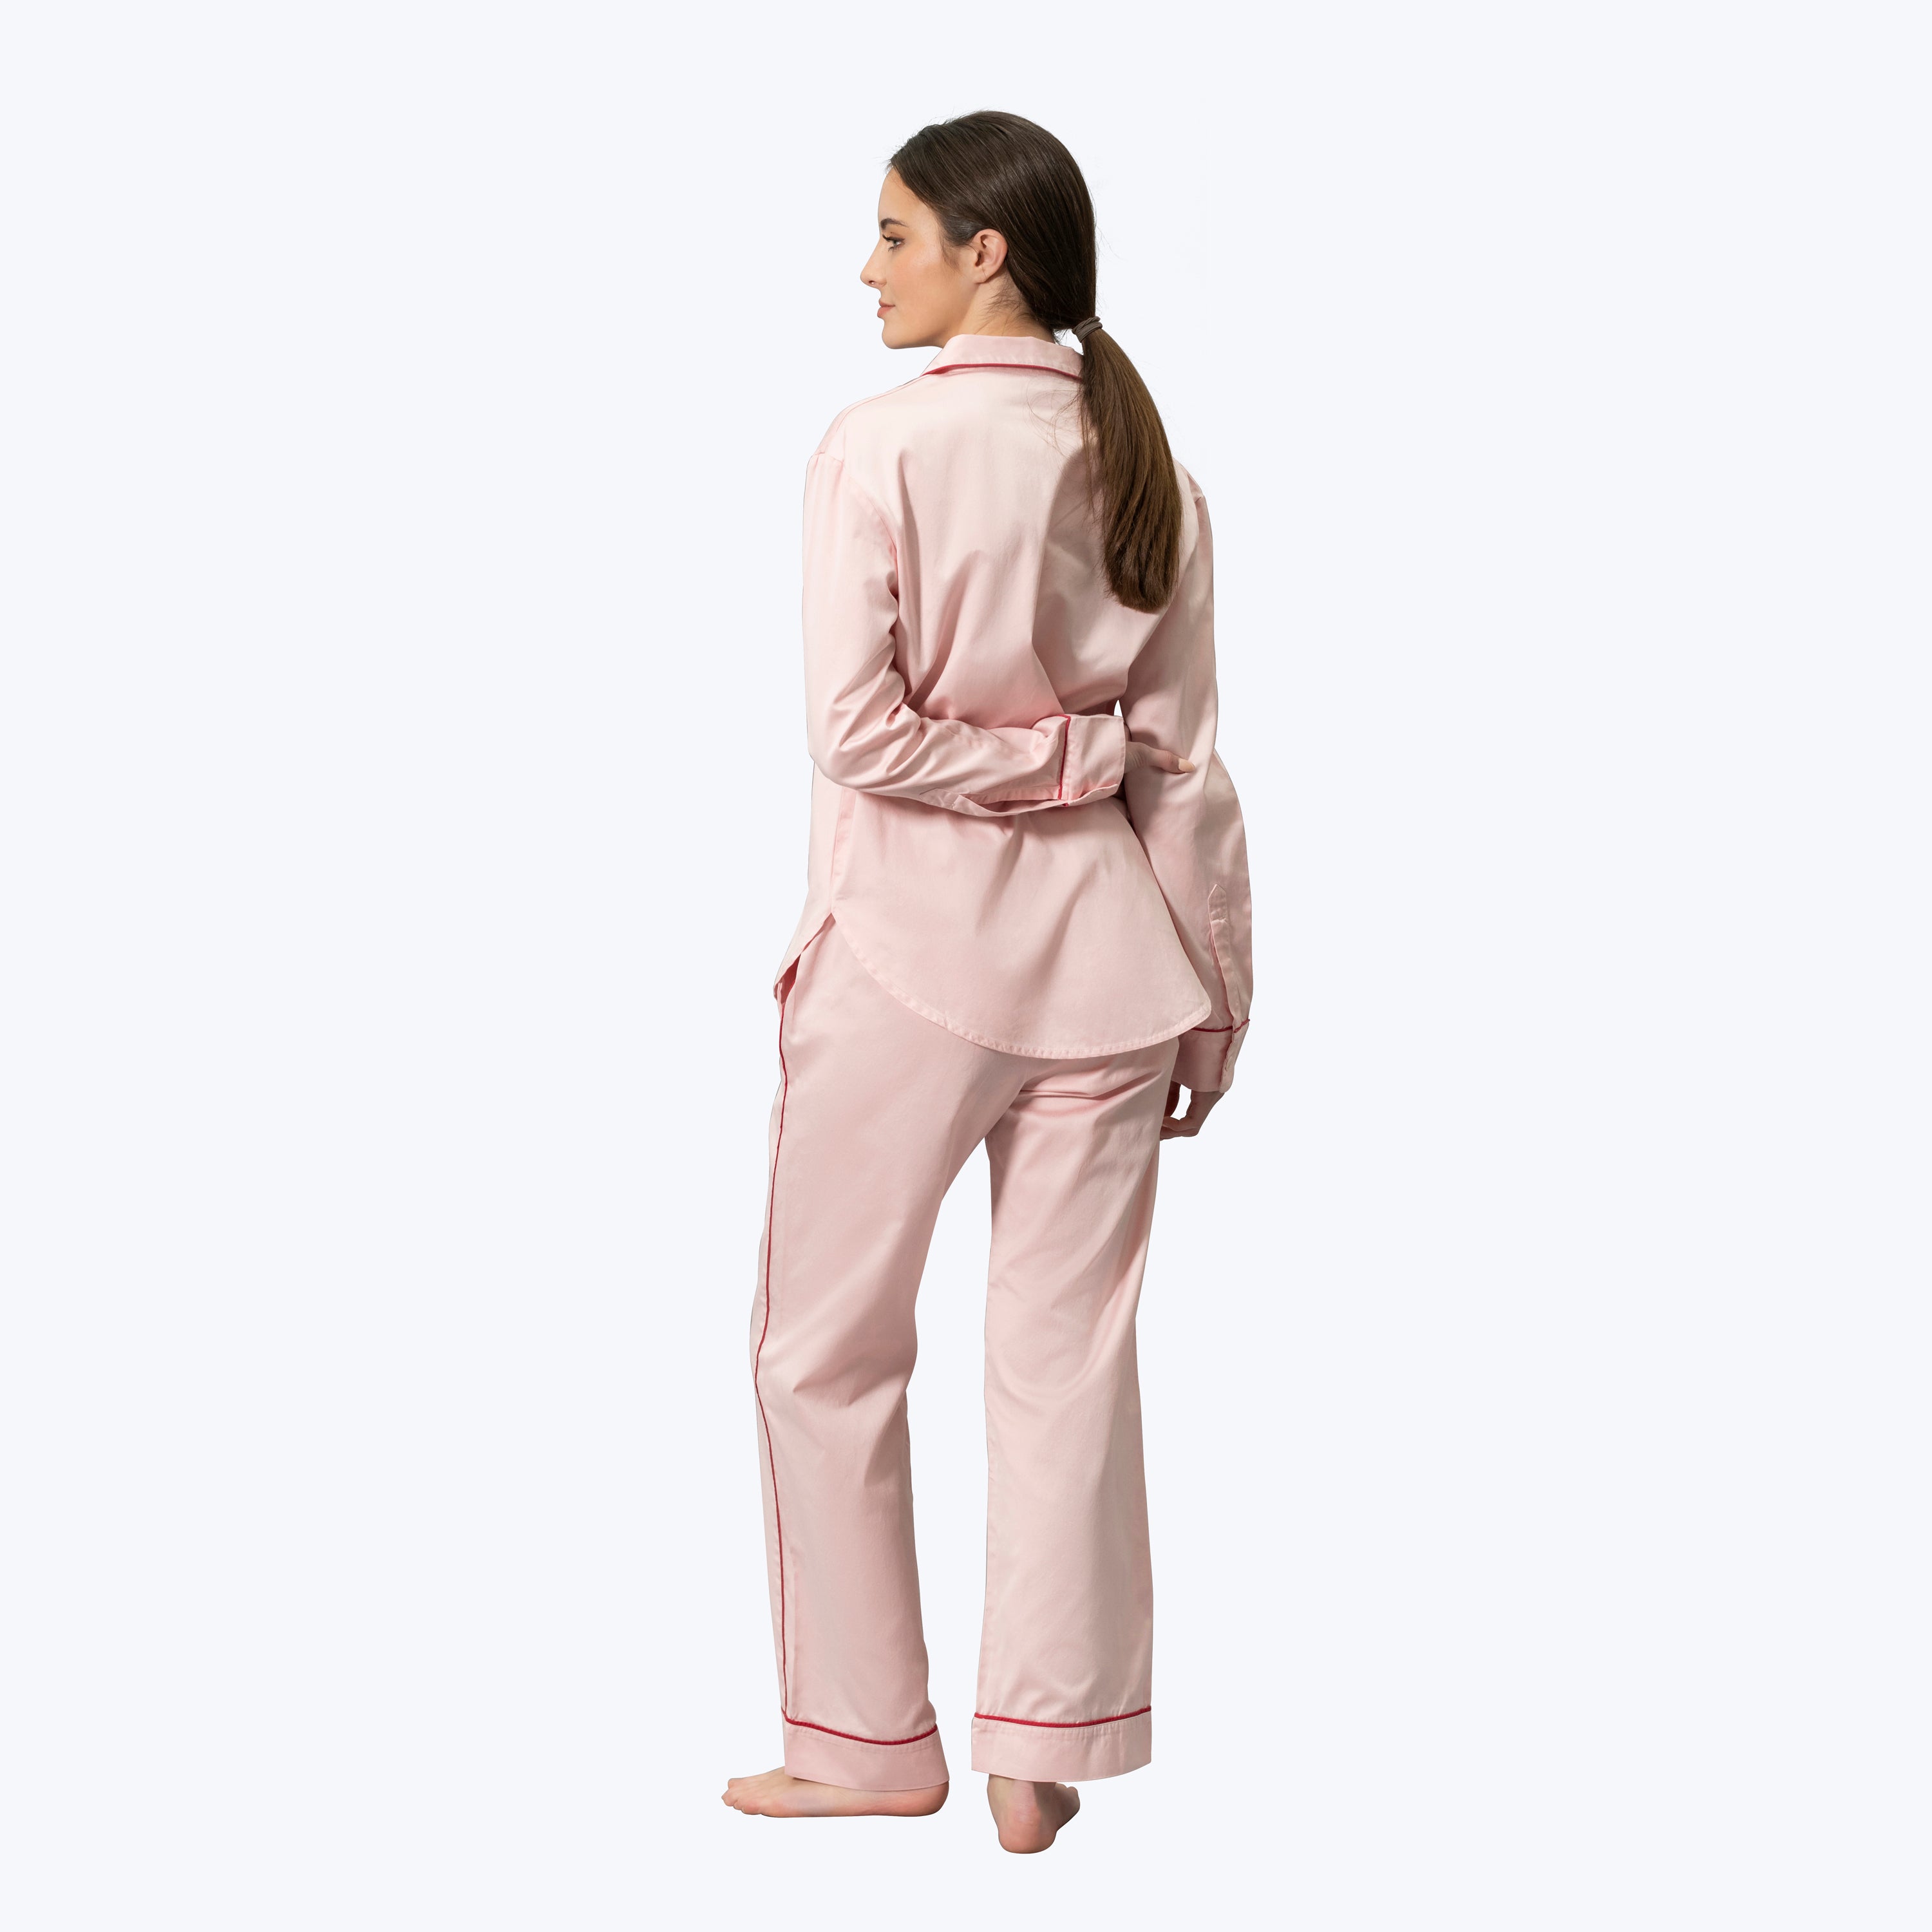 Nocturne Sateen Pajama Set Pink/Scarlet / Small